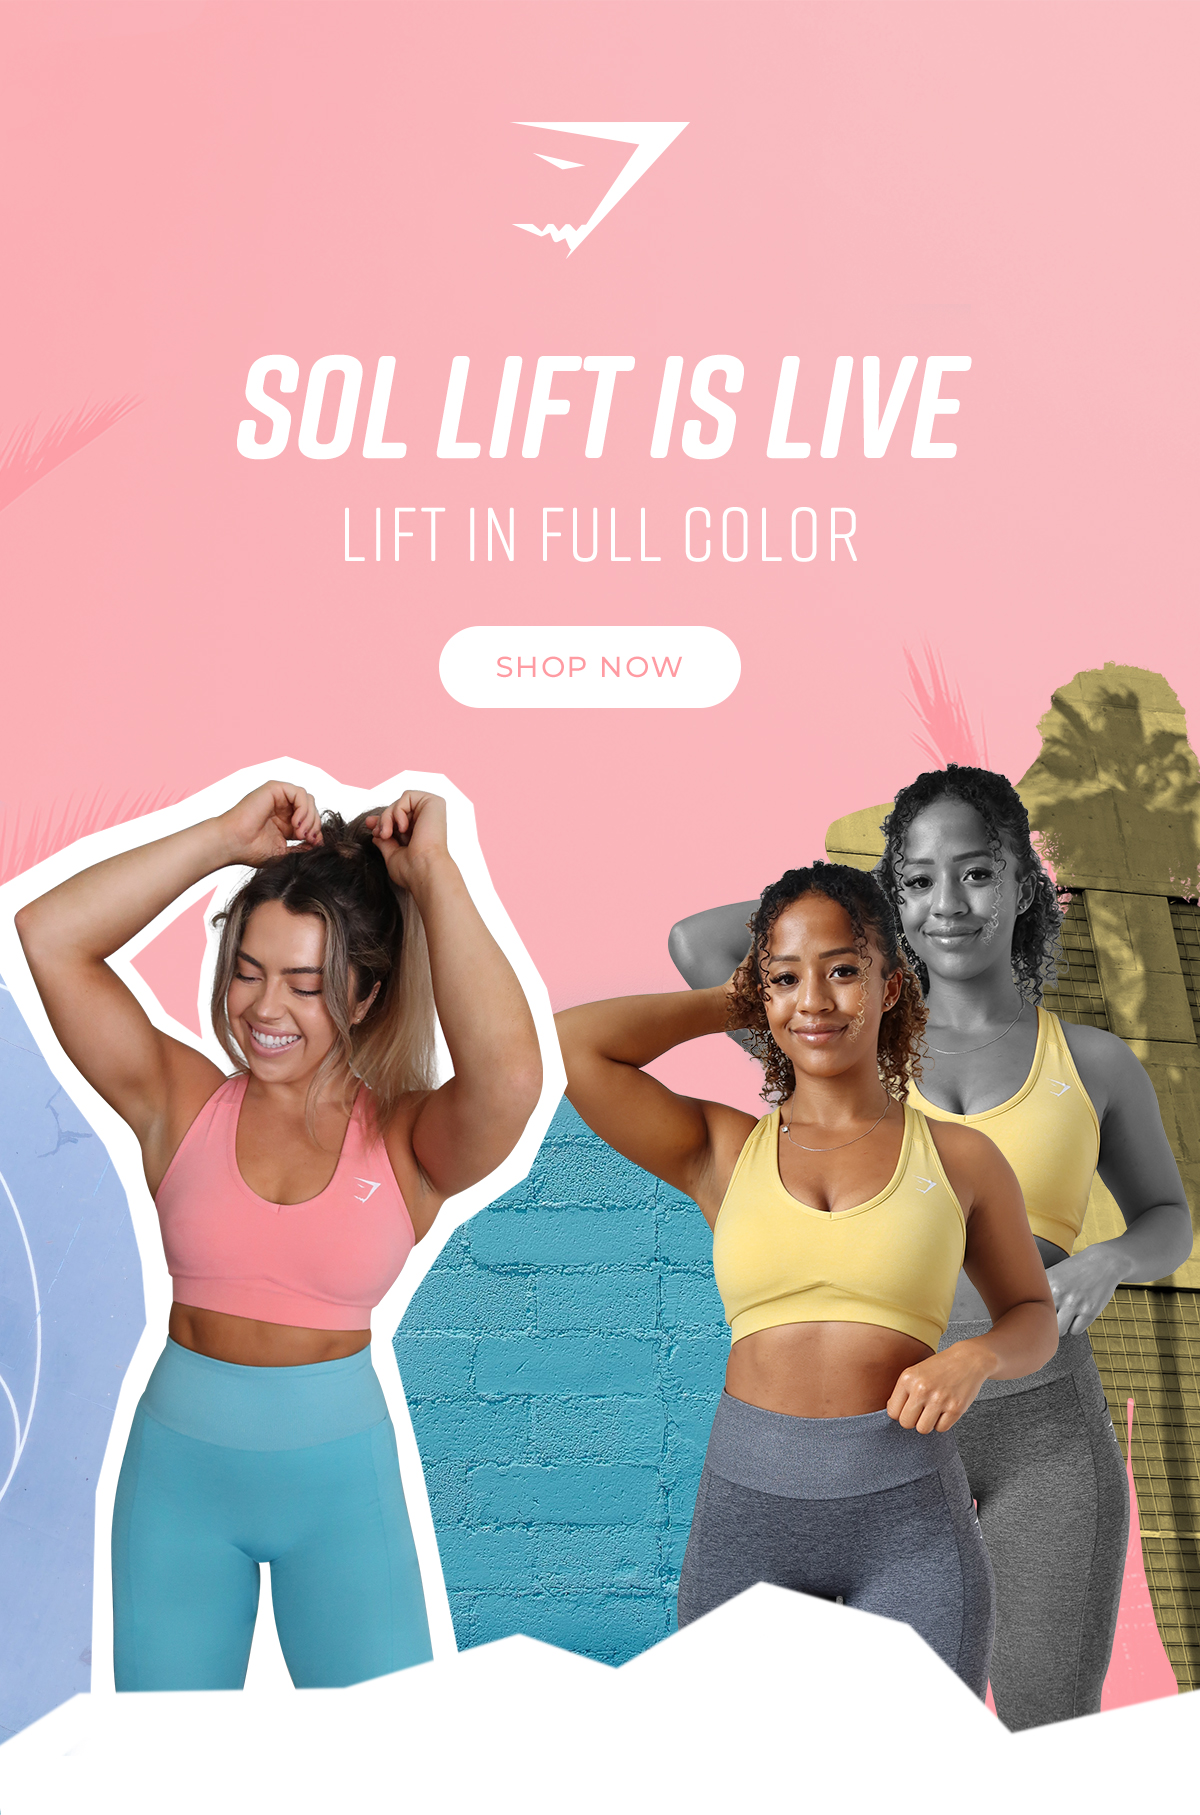 Sol Lift is Live. LIFT IN FULL COLOR. Shop Now.